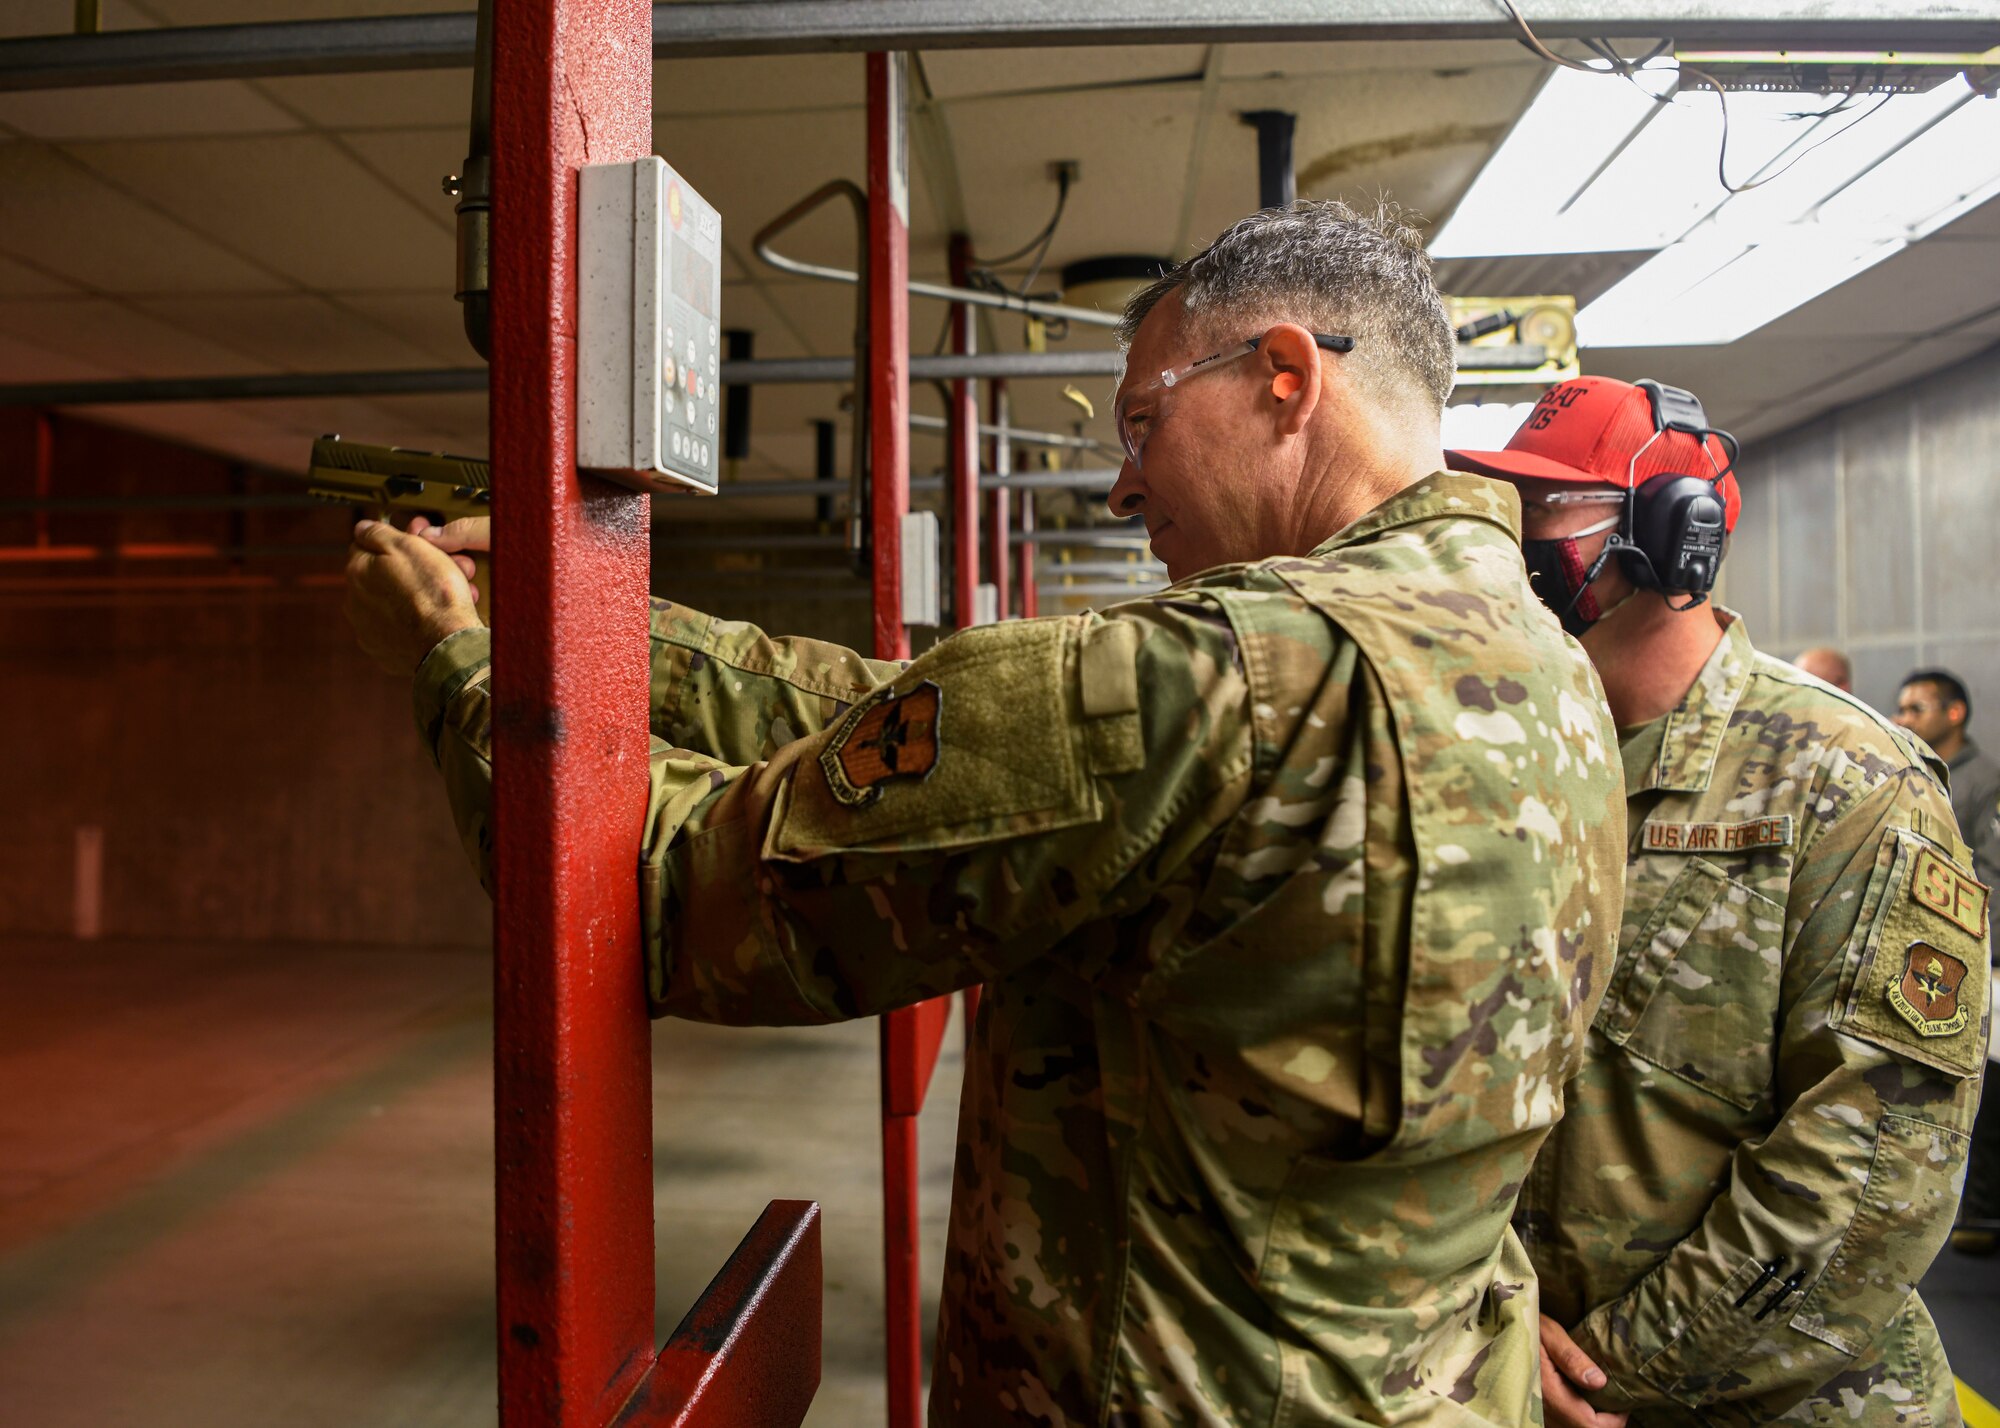 U.S. Air Force Maj. Gen. Craig Wills, 19th Air Force commander, fires an M9 Beretta while visiting the 56th Security Forces Squadron Combat Arms Training and Maintenance facility, June 29, 2021, at Luke Air Force Base, Arizona. Leadership from the 19th AF visited Luke AFB to engage with the 56th Fighter Wing and gain a better understanding of the successes and challenges faced by the wing. The 56th FW’s mission is to train the world’s greatest fighter pilots and combat-ready Airmen. (U.S. Air Force photo by Airman 1st Class David Busby)